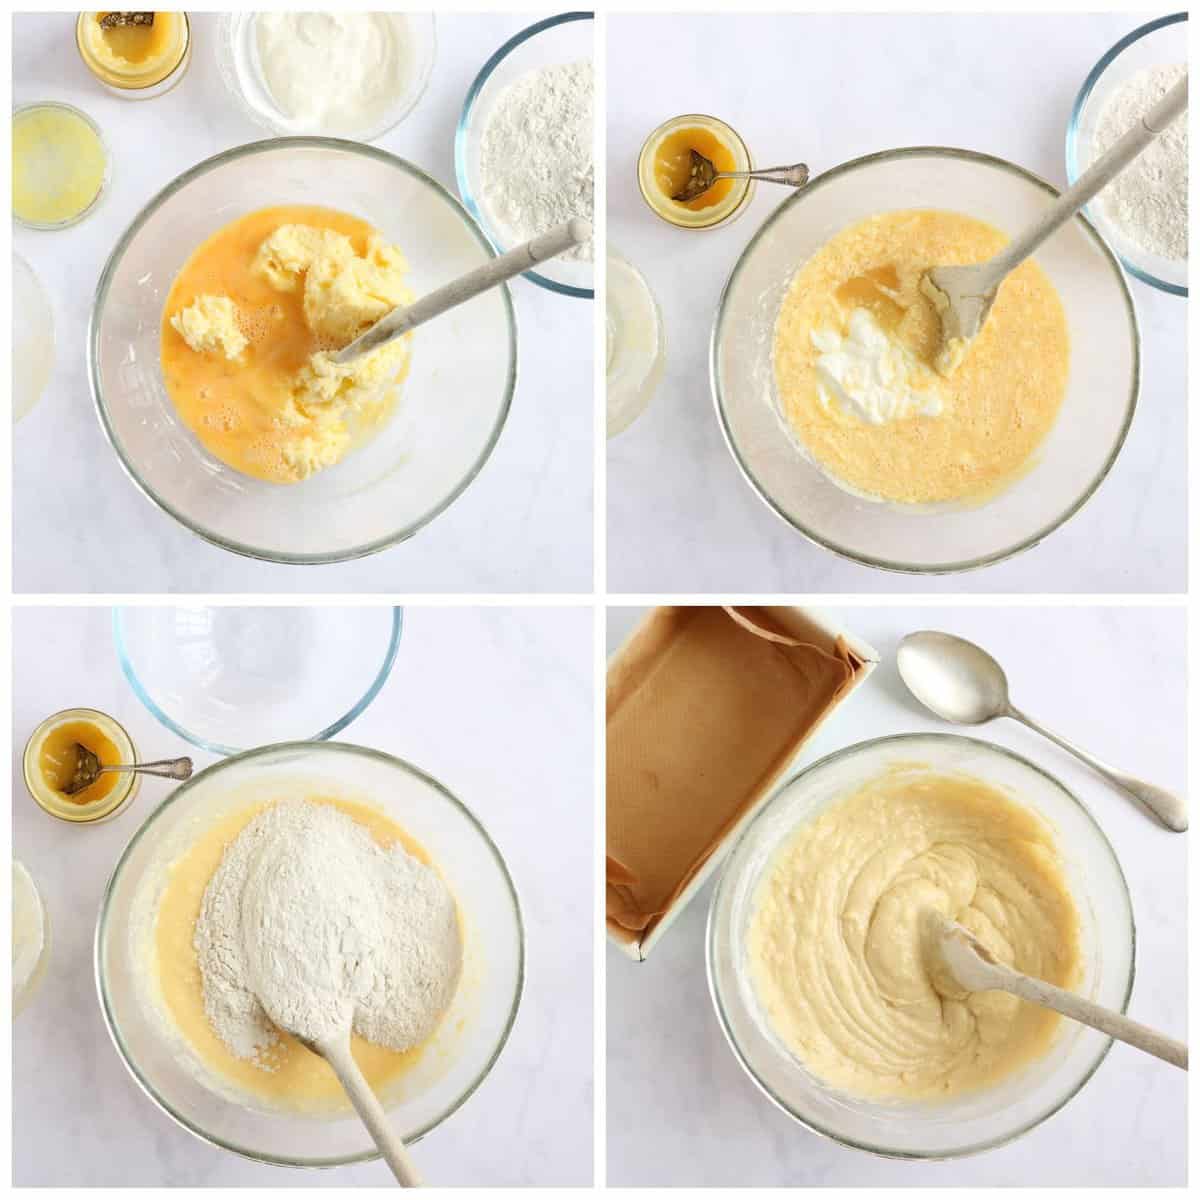 Step by step photo instructions for making lemon curd cake.